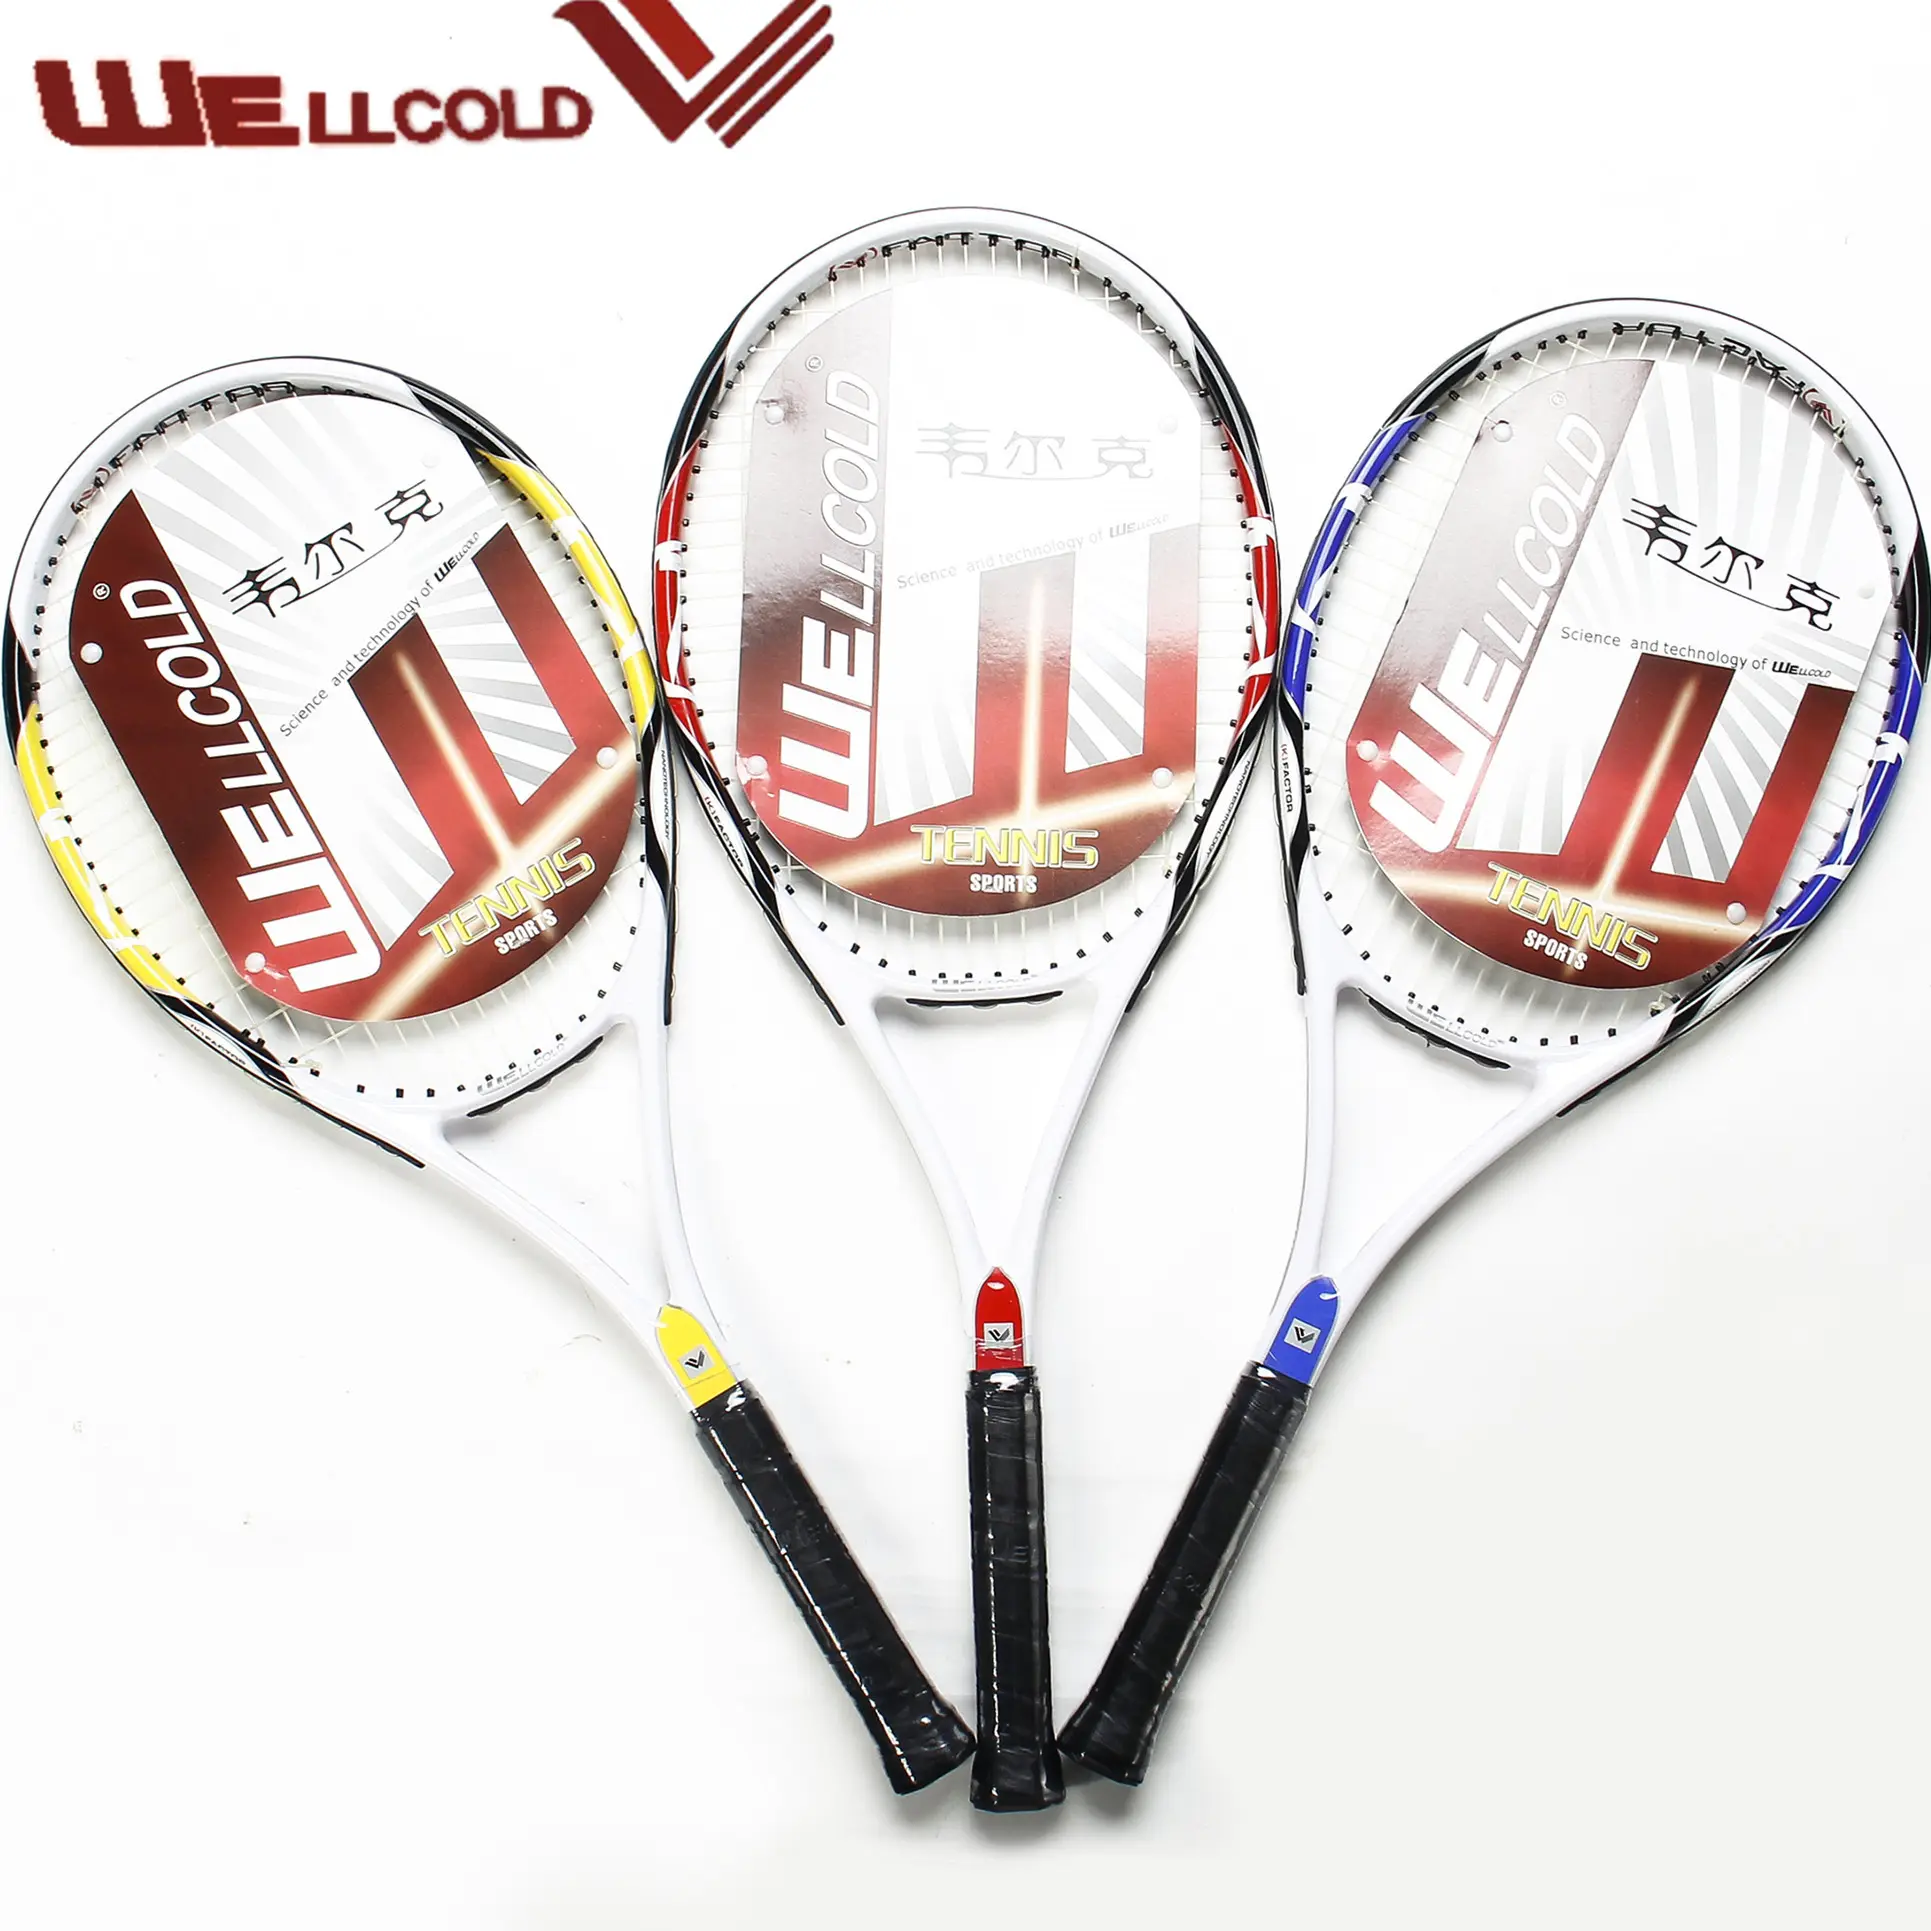 New arrival best quality head tennis racket tennis overgrip wholesale for players